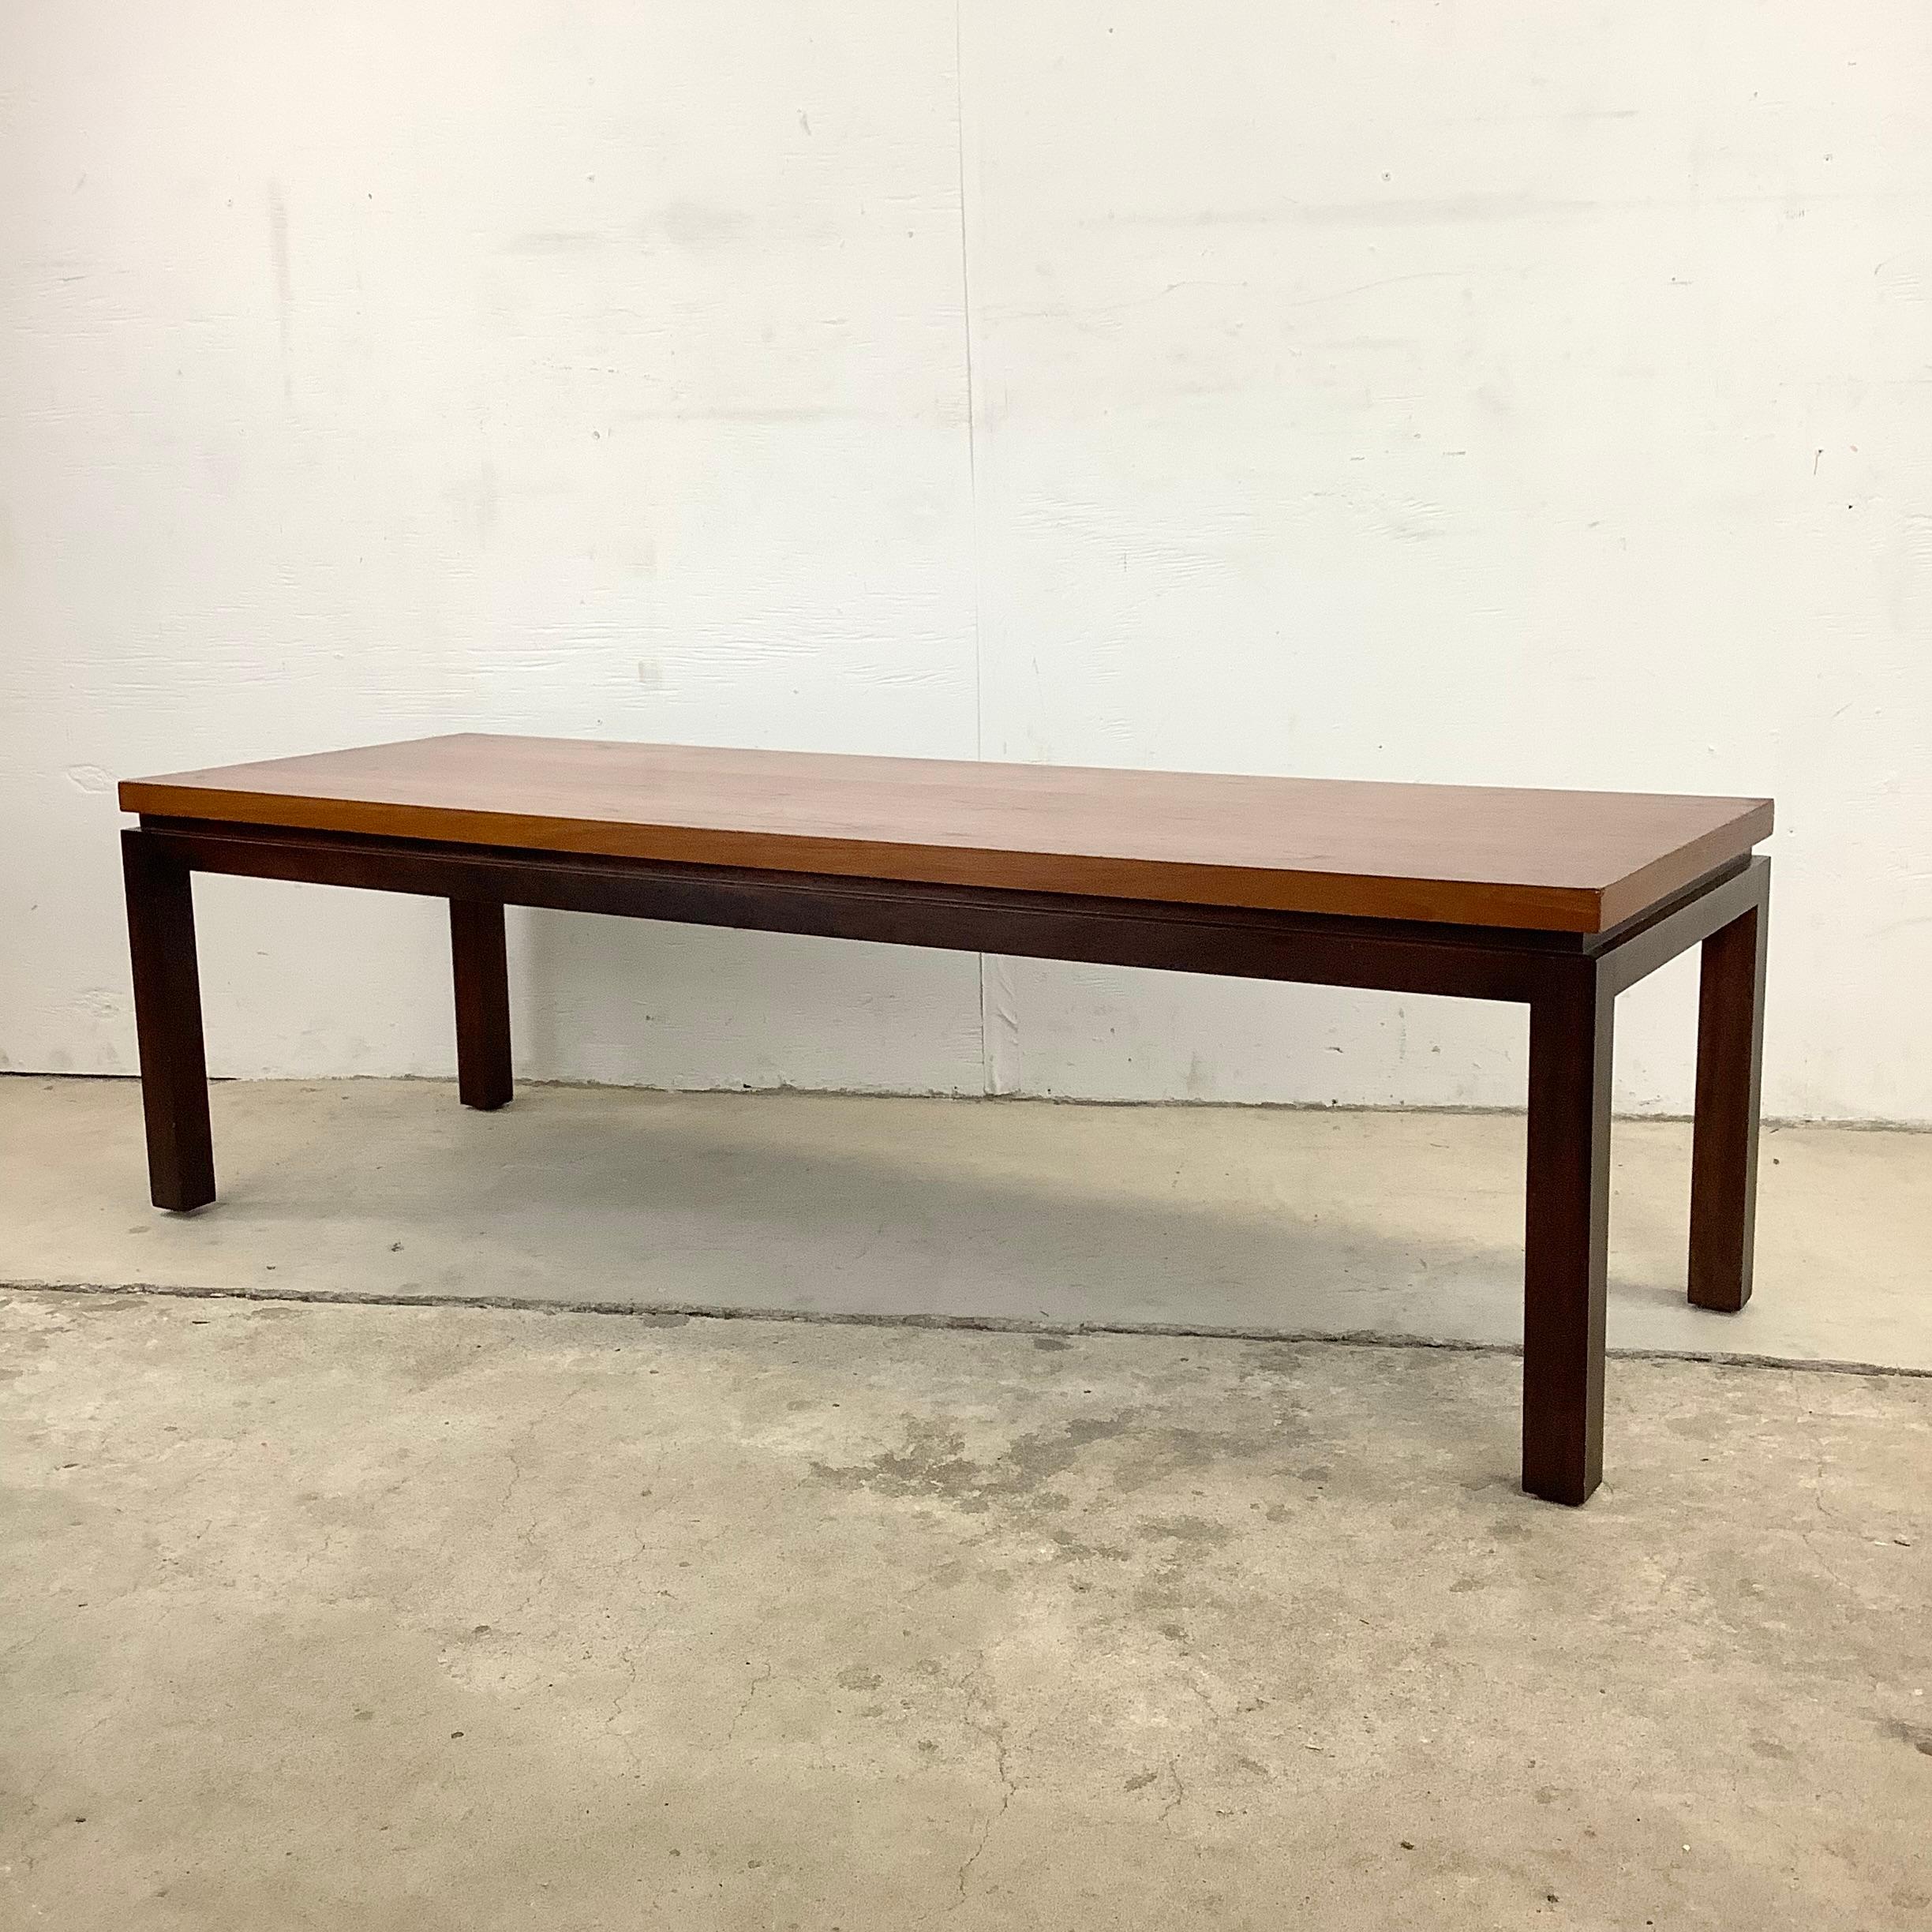 Striking Mid-Century Modern coffee table by Harvey Probber features floating top style with clean lines and two tone finish. The beautiful vintage design makes the perfect center piece to any interior seating area. Manufacturers tag affixed to